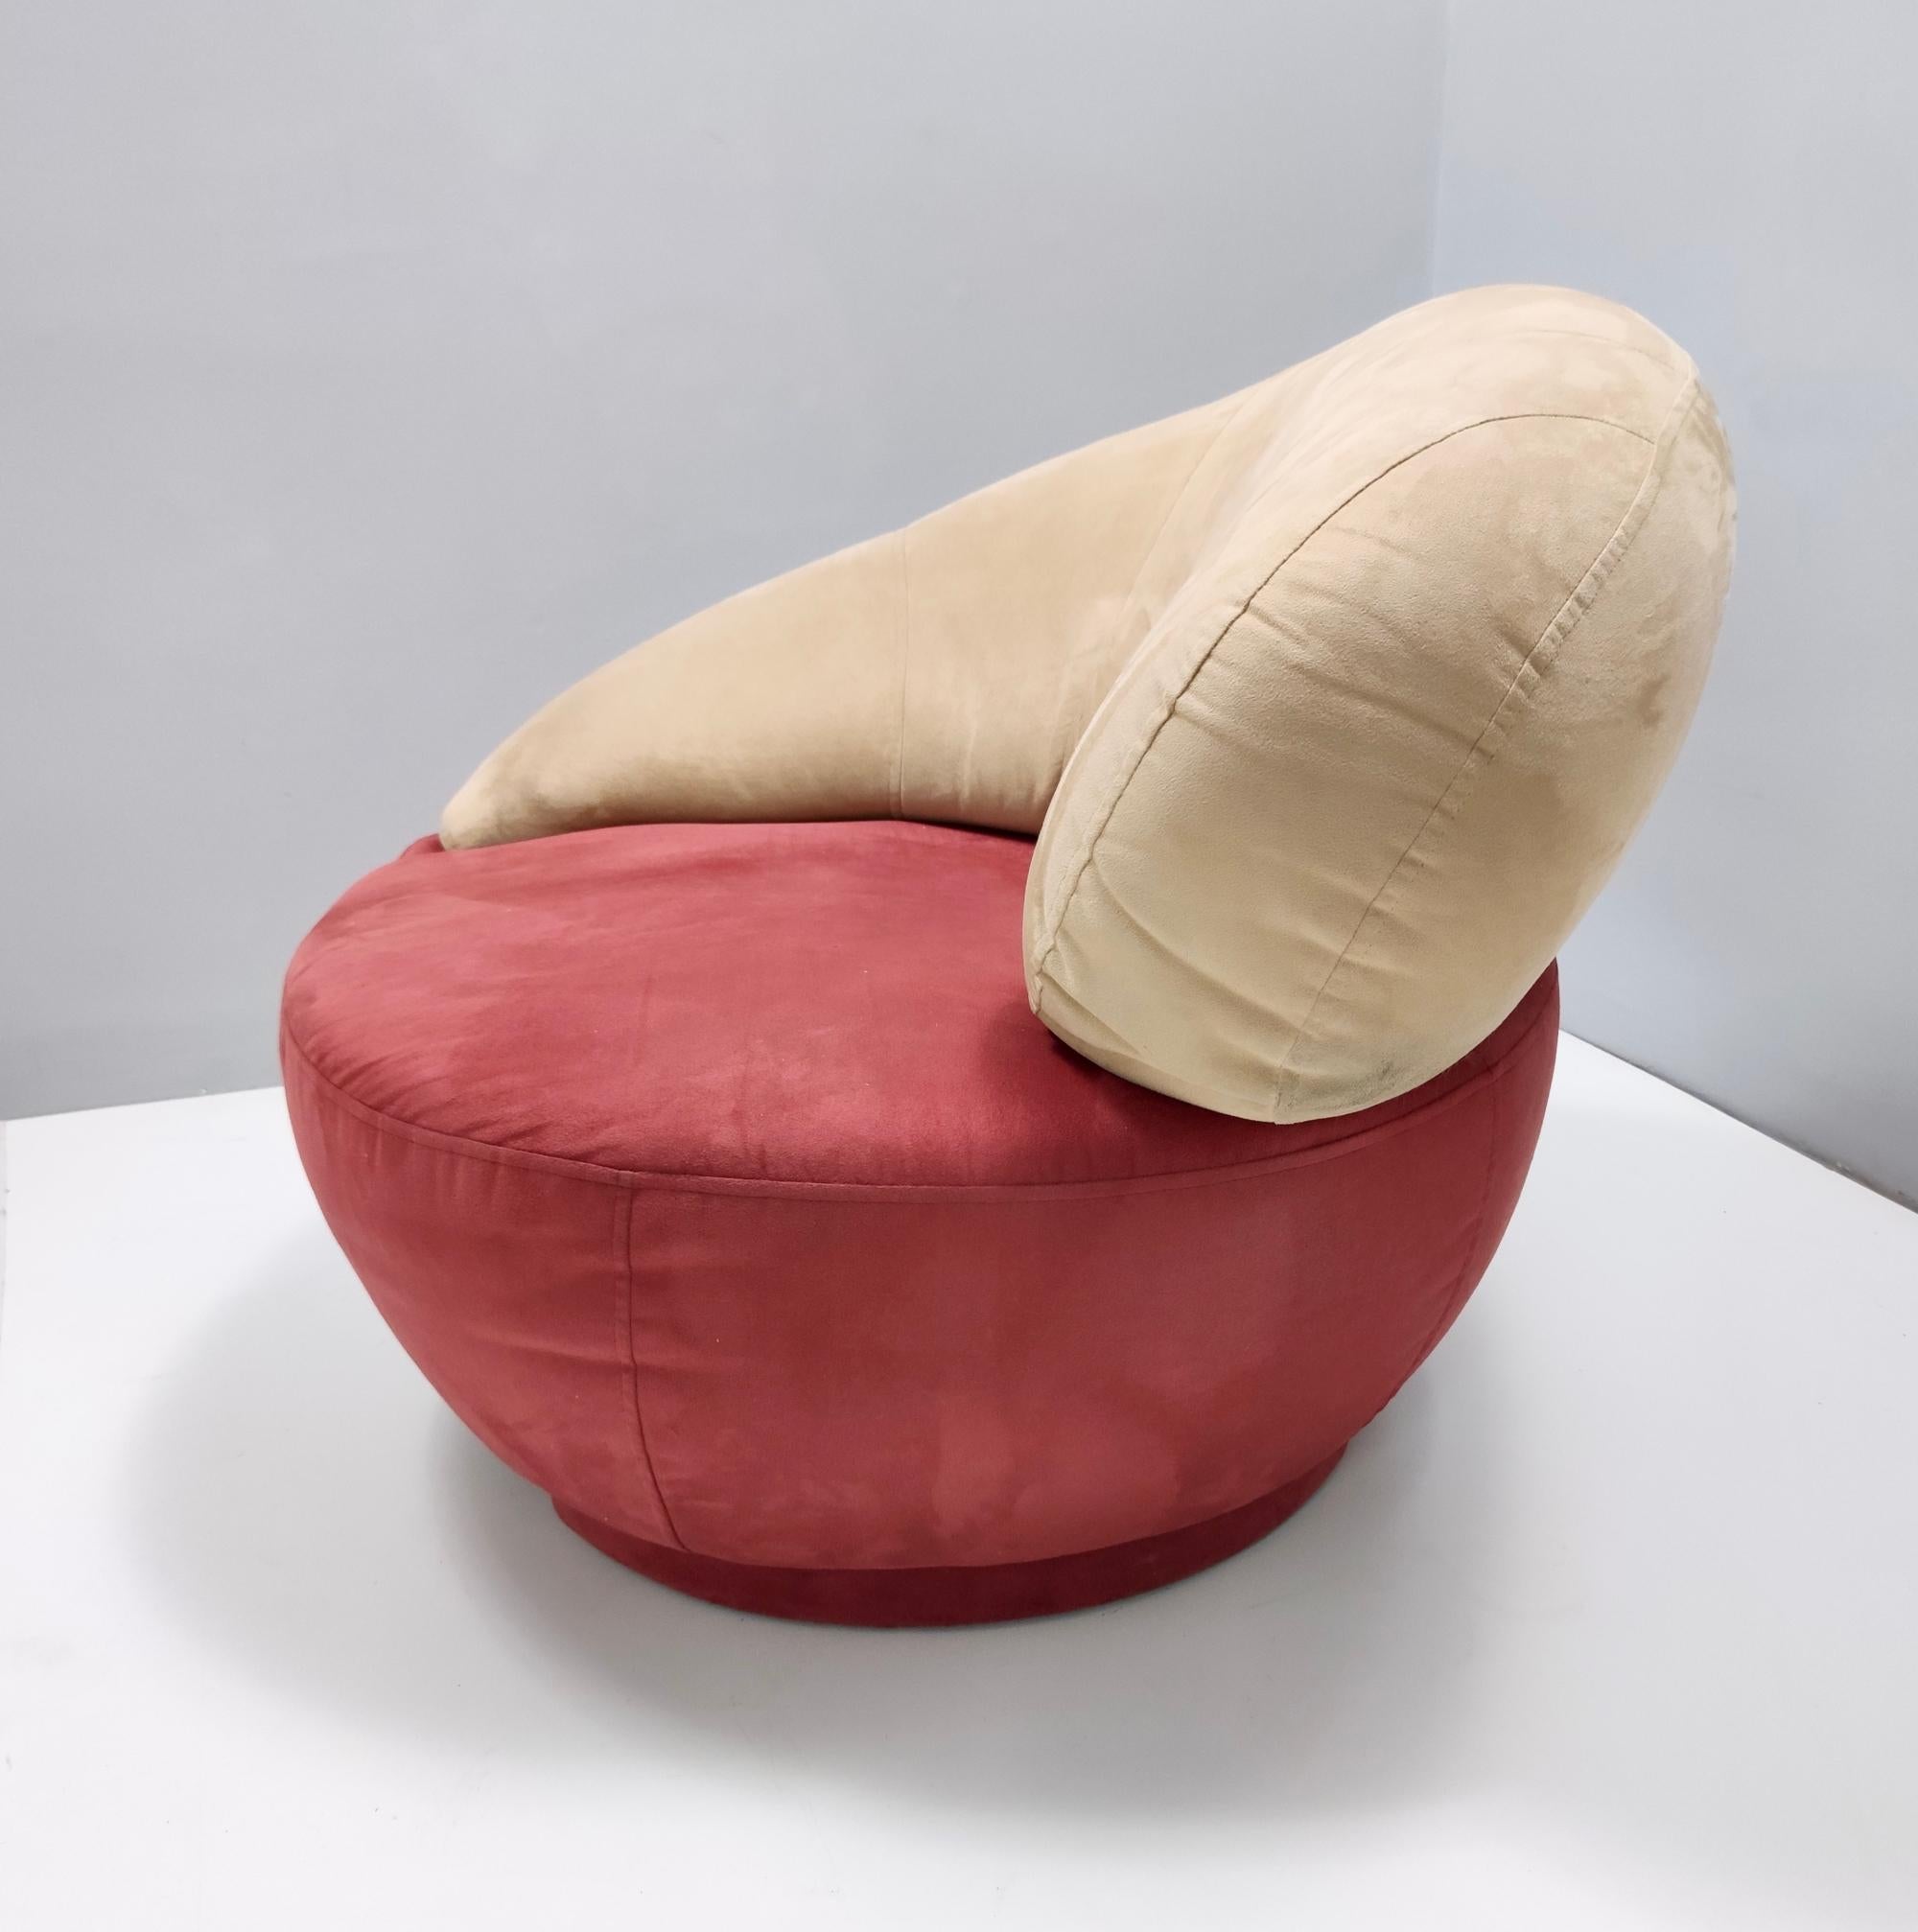 Late 20th Century Postmodern Lounge Chair with a Beige and Crimson Alcantara Upholstery, Italy